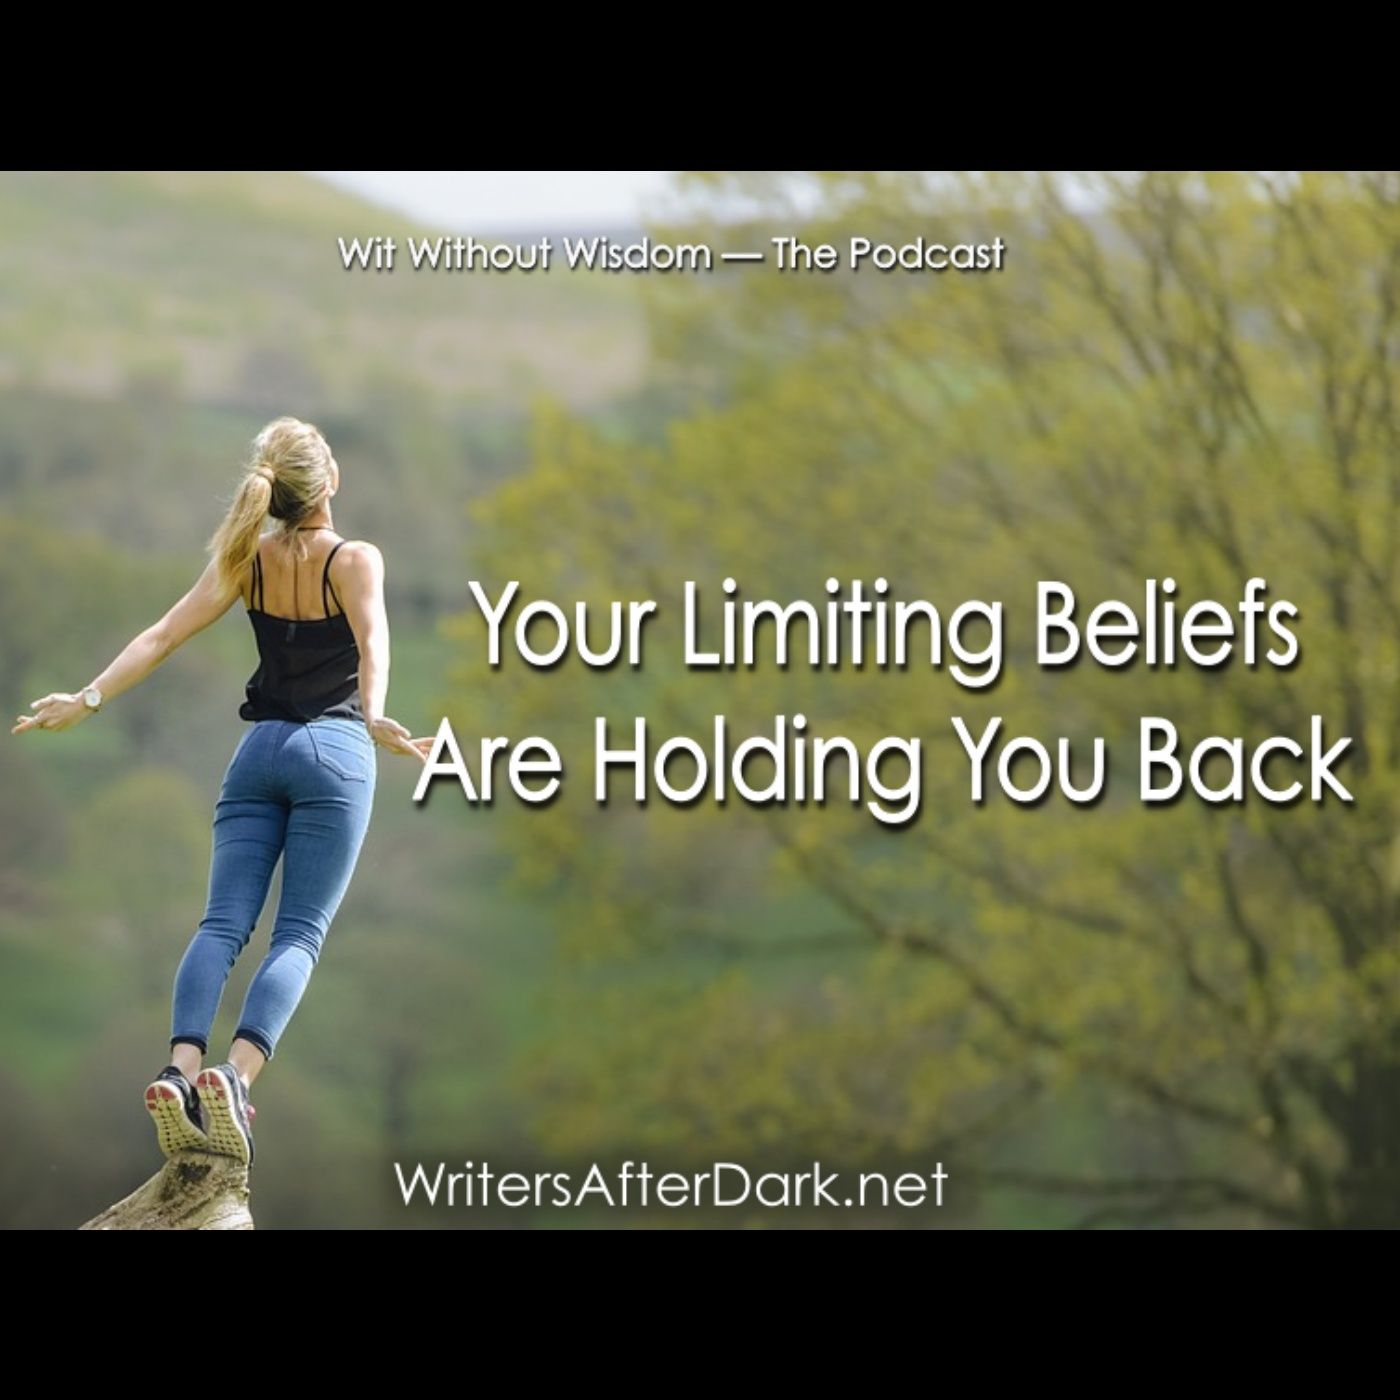 Your Limiting Beliefs Are Holding You Back